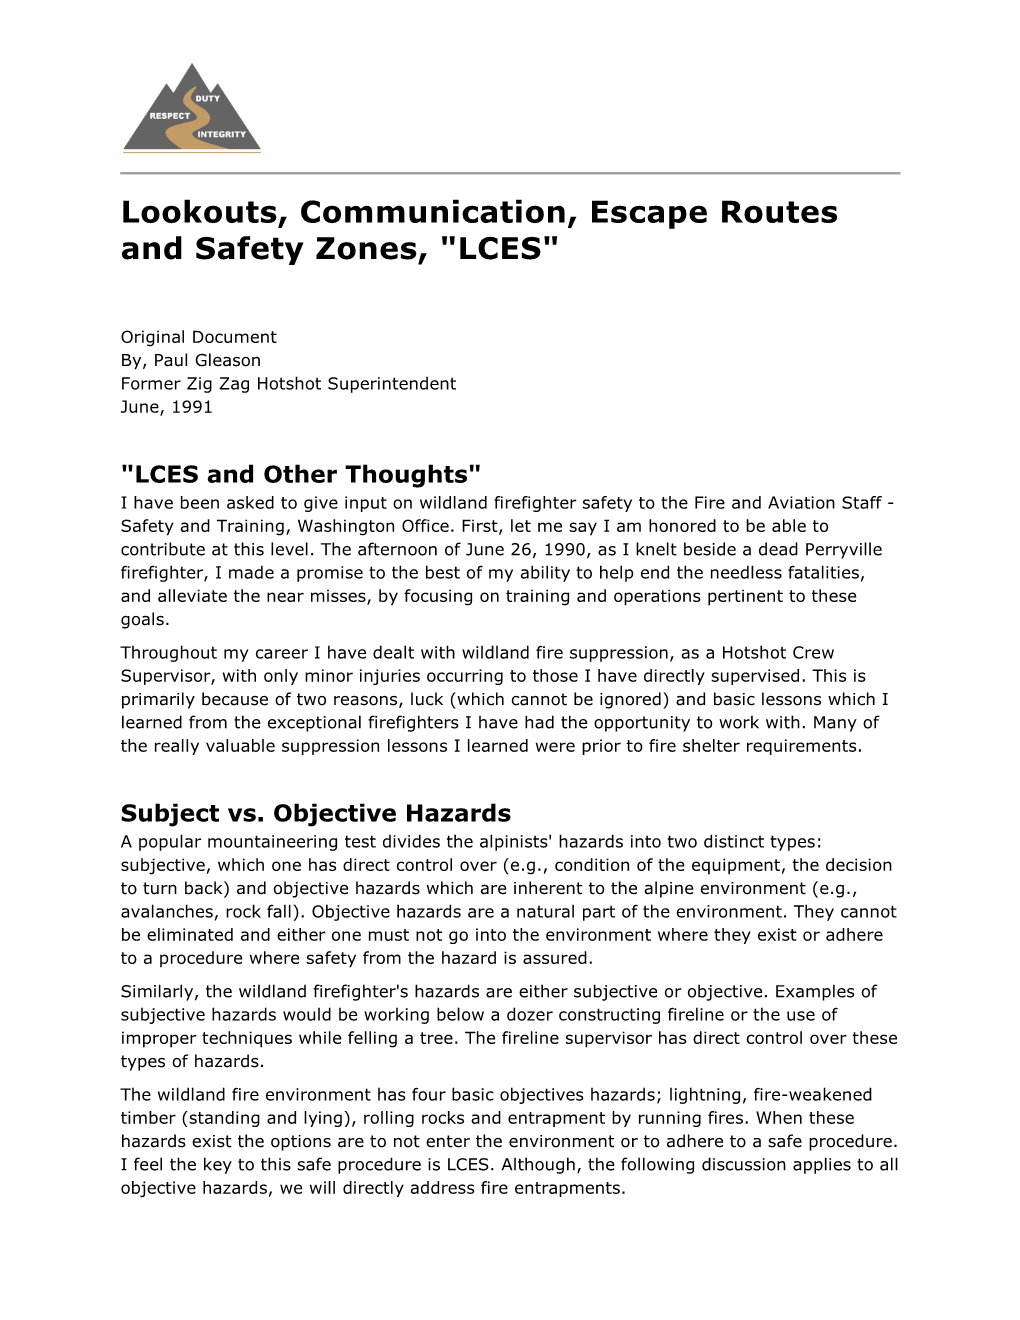 Lookouts, Communication, Escape Routes and Safety Zones, "LCES"